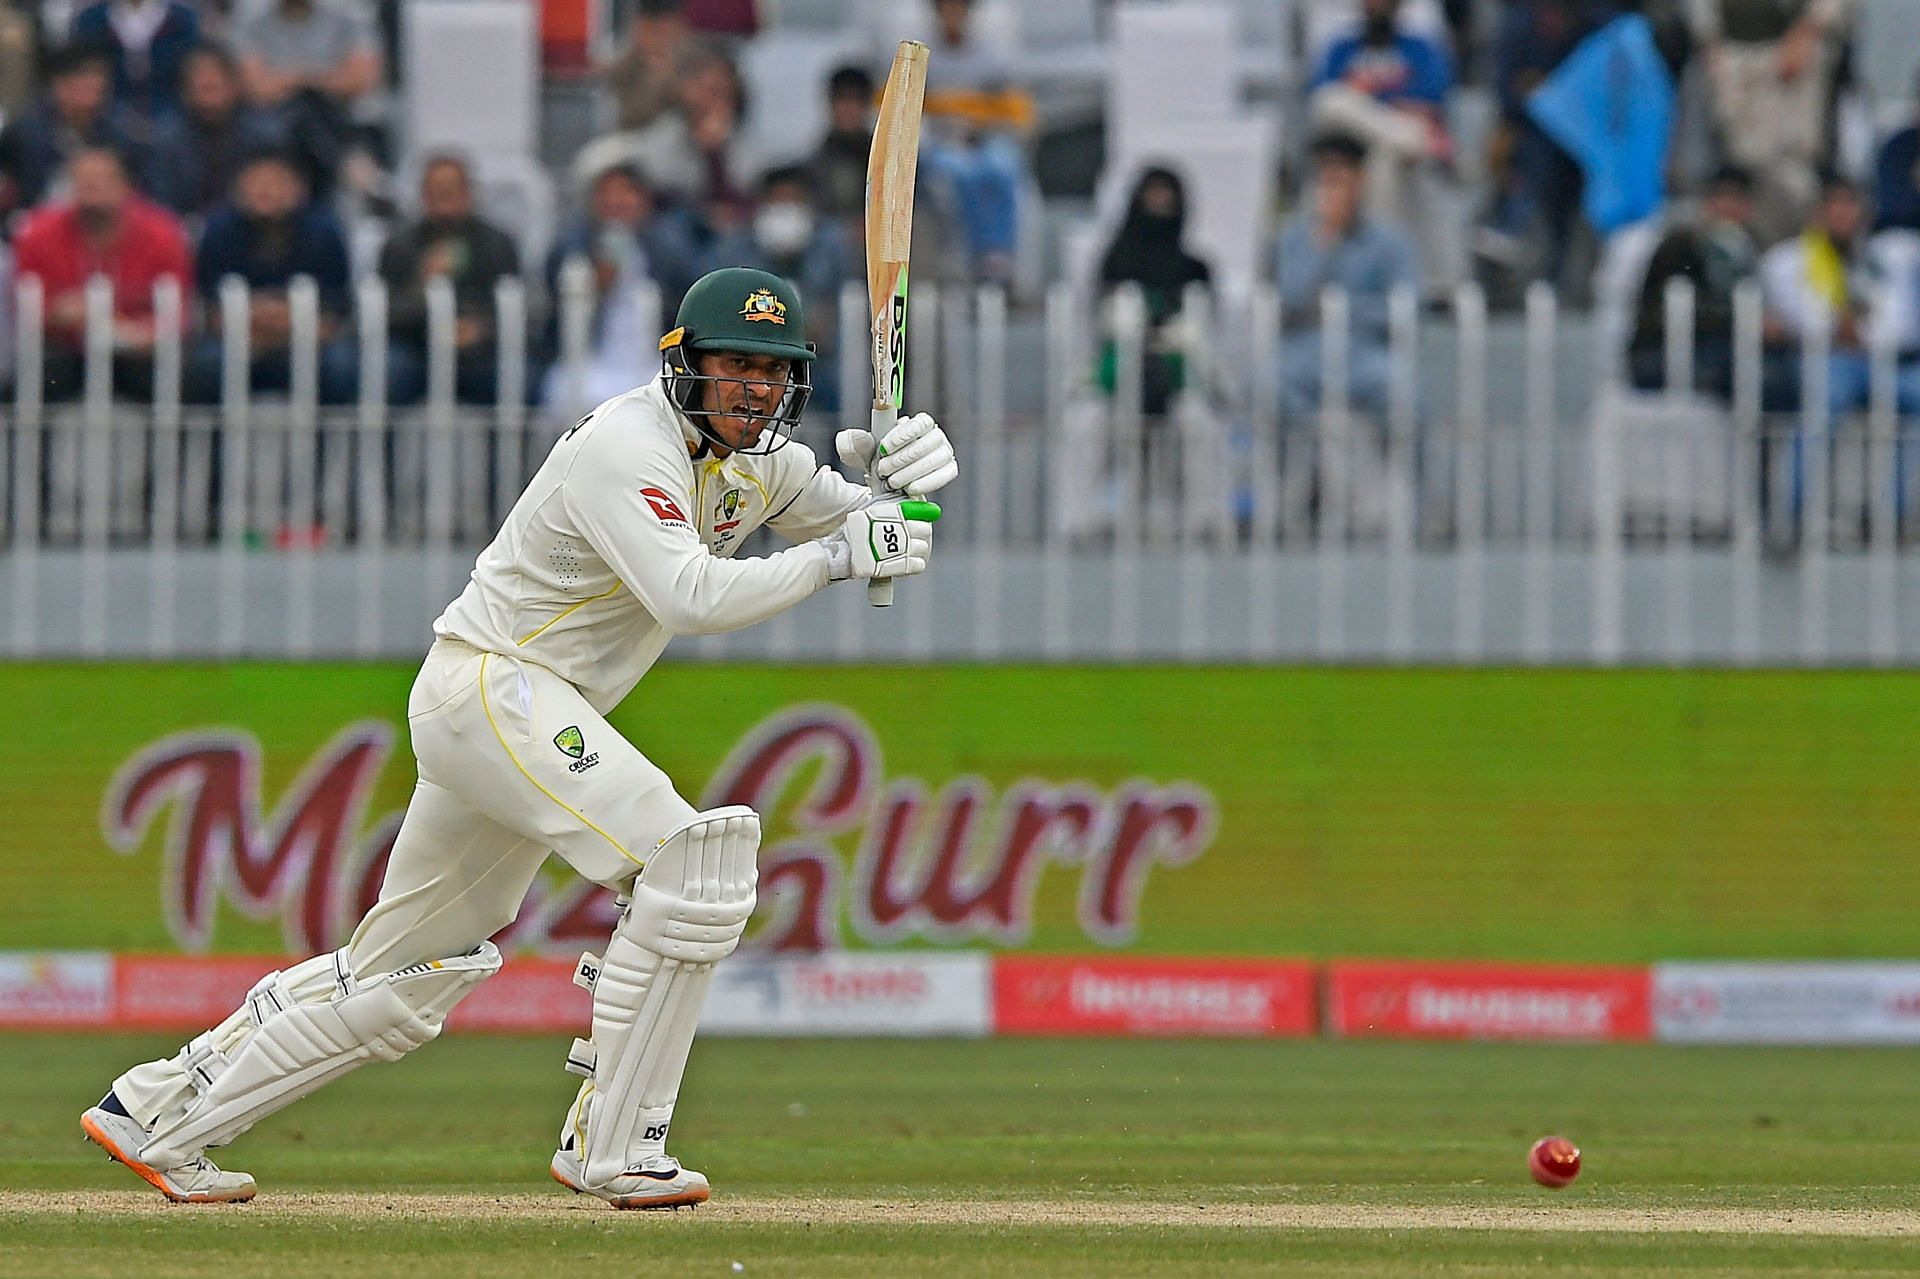 Usman Khawaja batted superbly on day two. (Credits: Twitter)